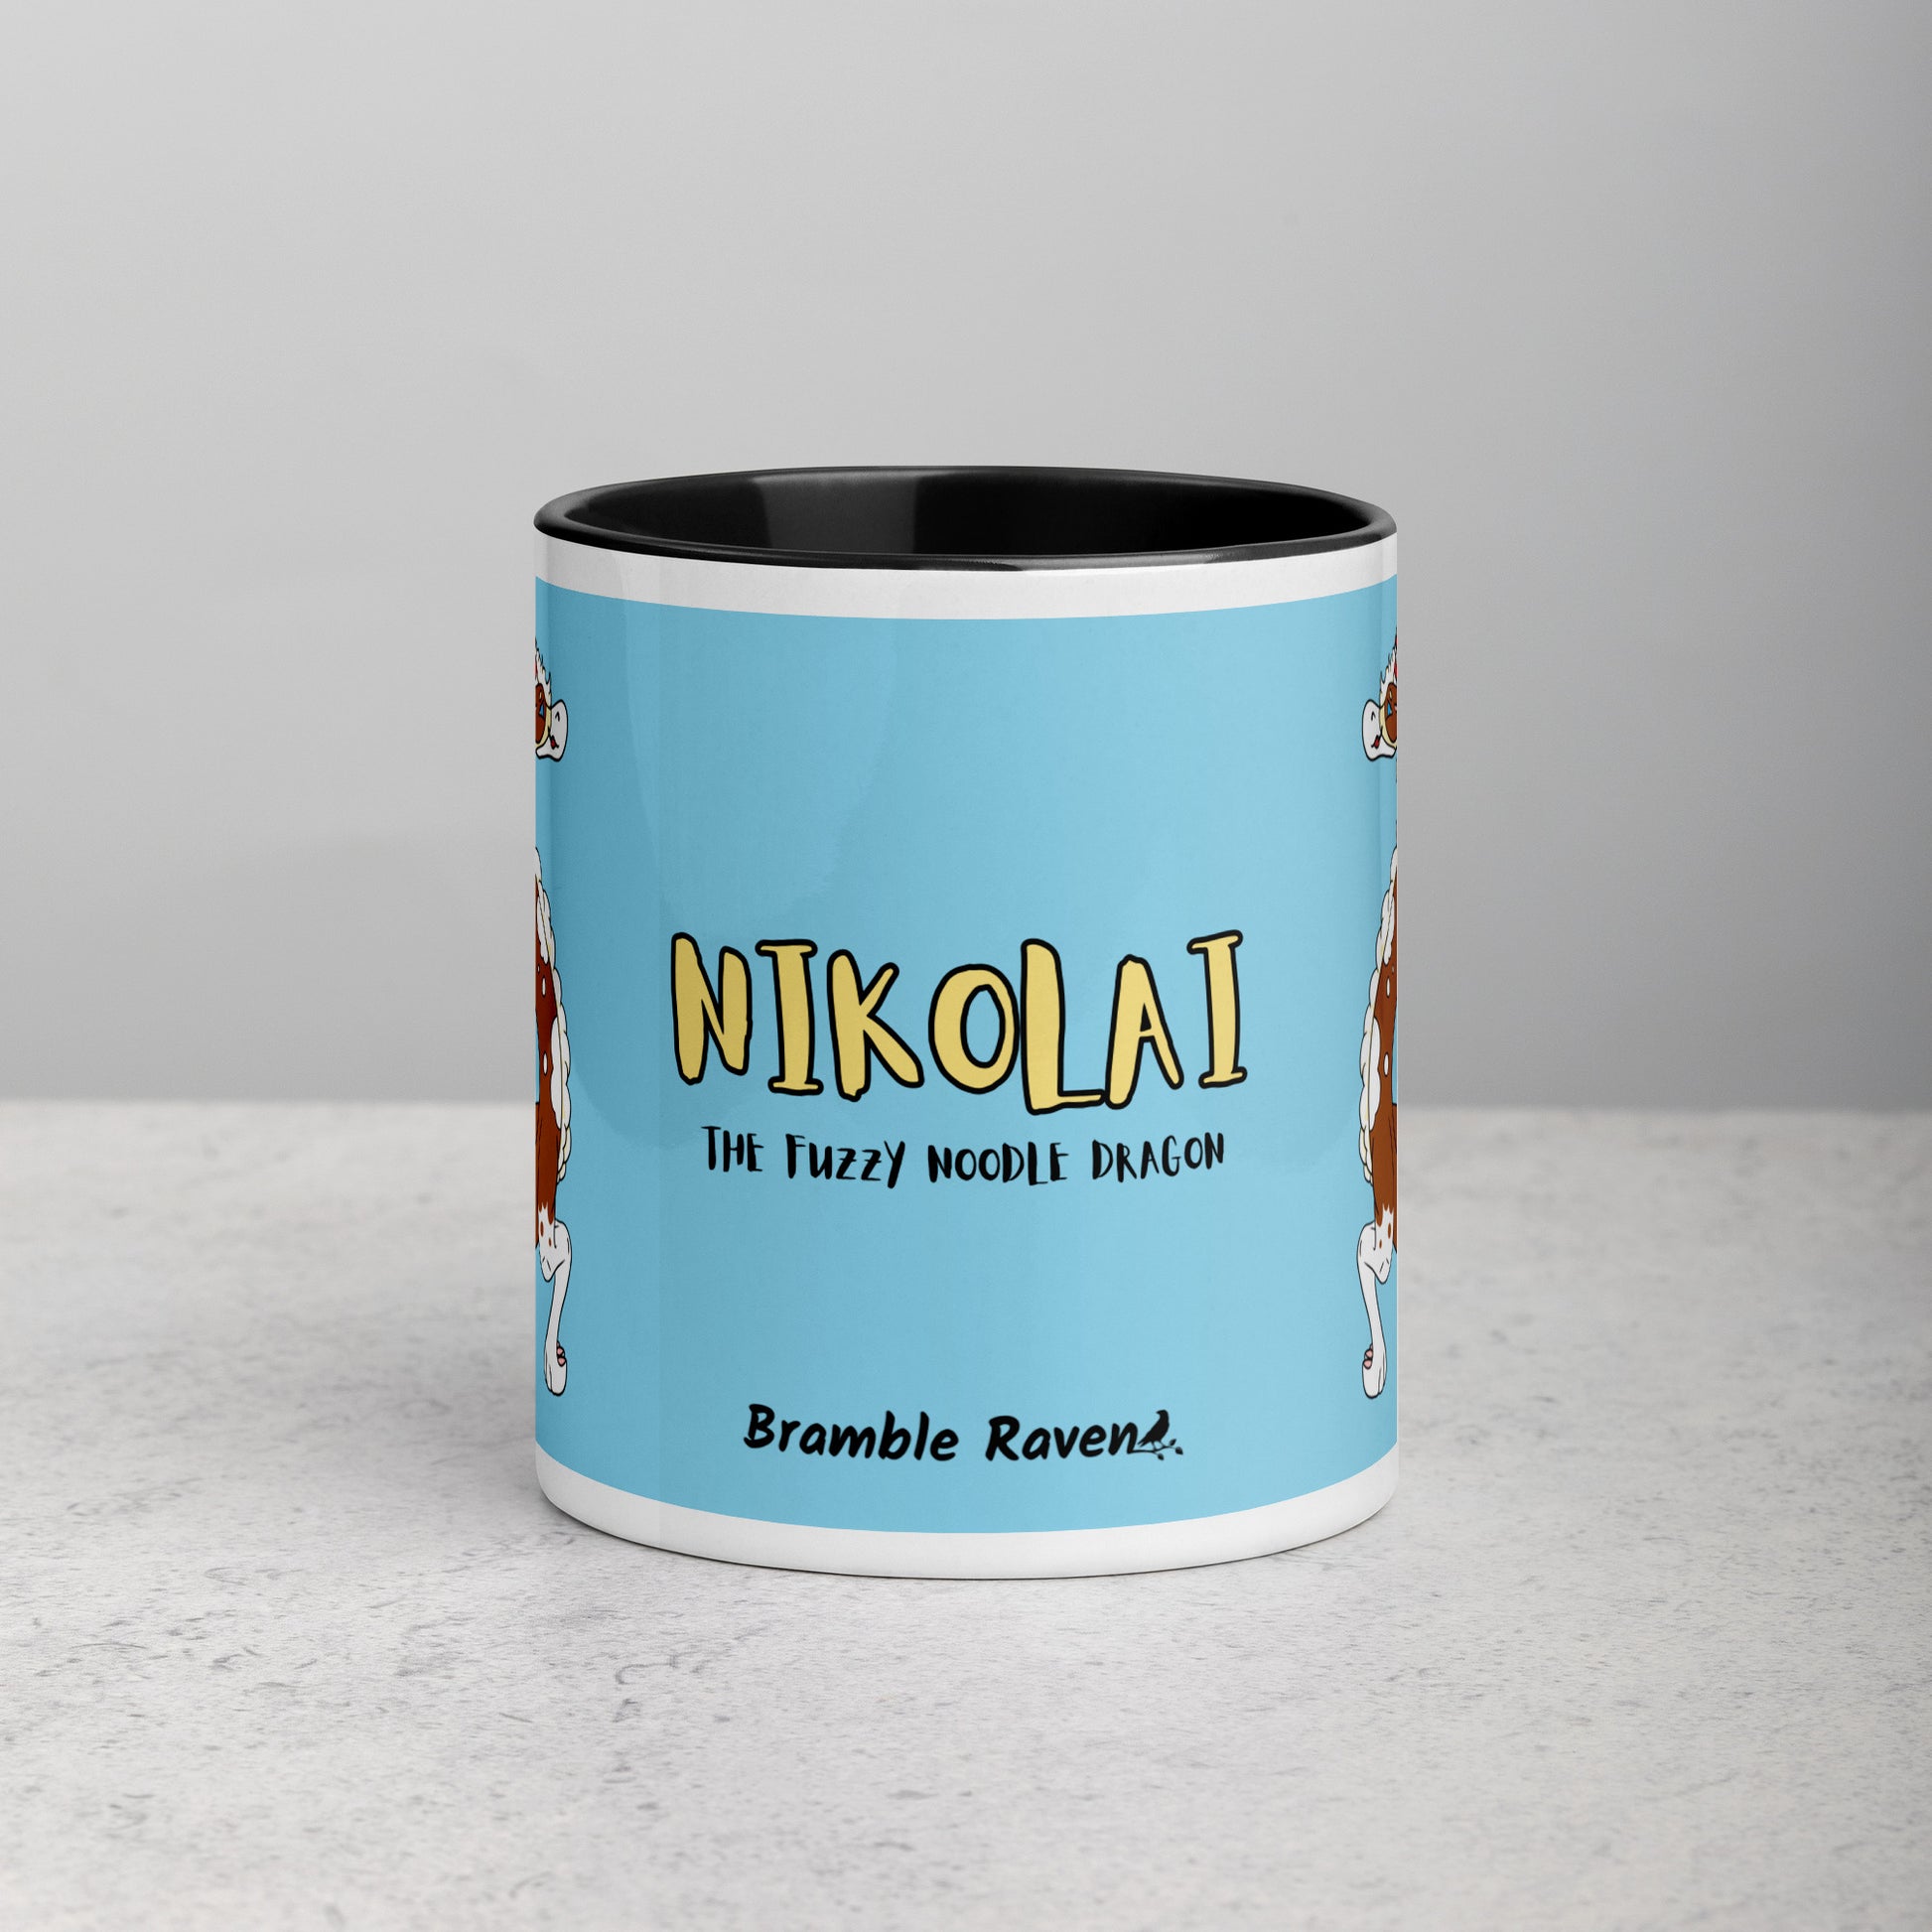 11 ounce ceramic mug with black handle, rim and inside color. Features double-sided image of Nikolai the Fuzzy Noodle Root beer float dragon on a light blue background. Mug is microwave and dishwasher safe. Front view shows Nikolai the Fuzzy Noodle Dragon text and Bramble Raven logo.